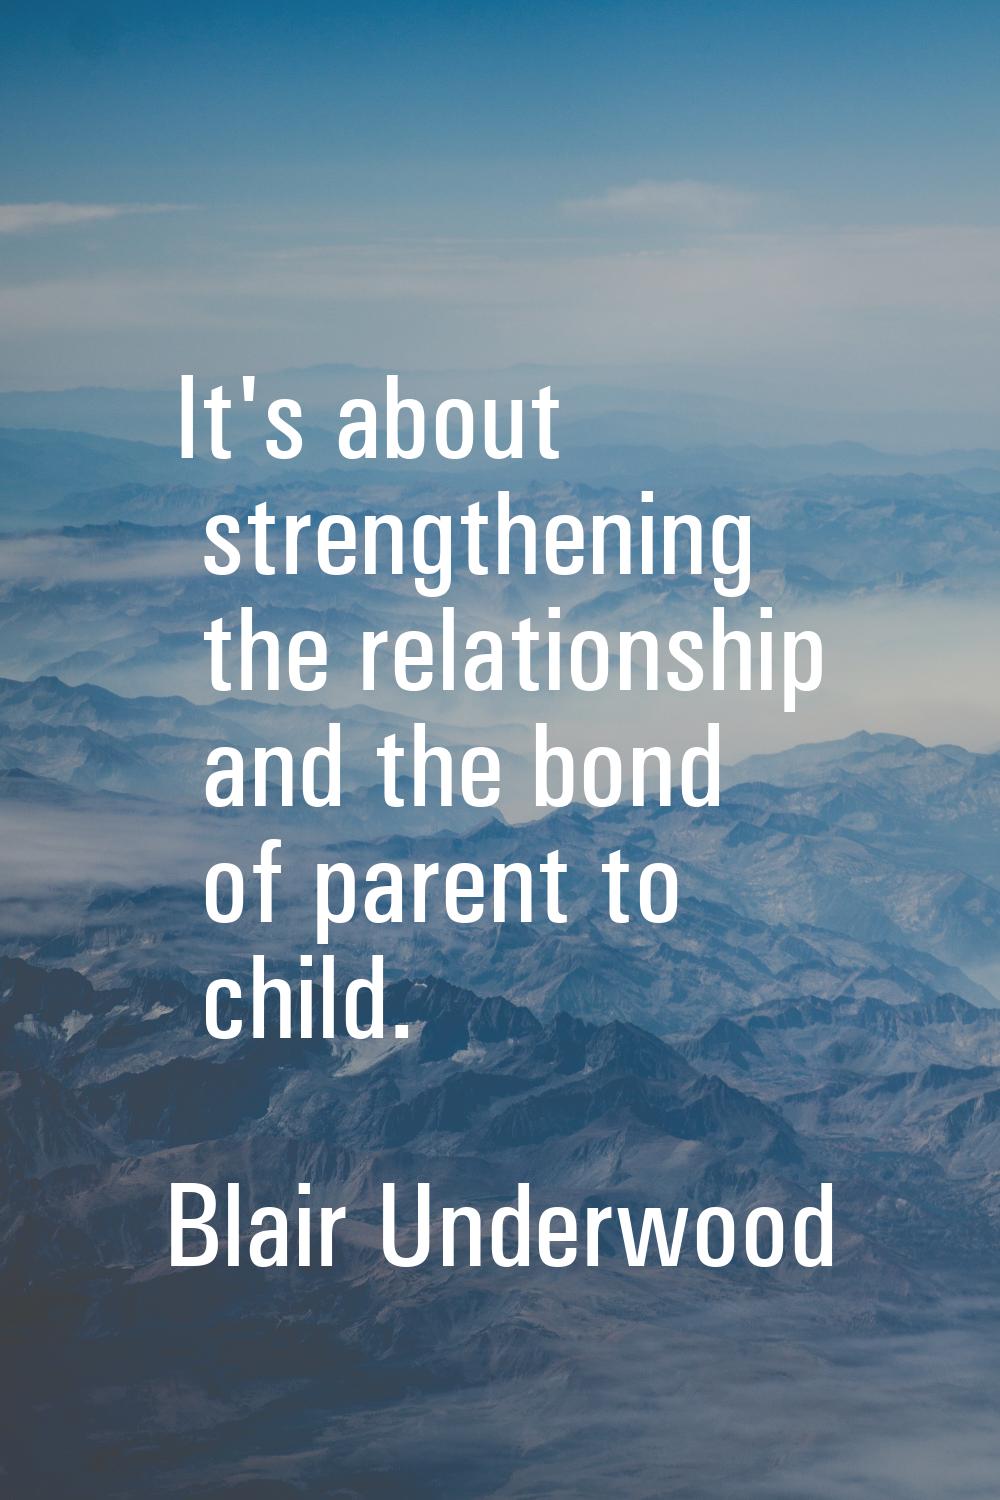 It's about strengthening the relationship and the bond of parent to child.